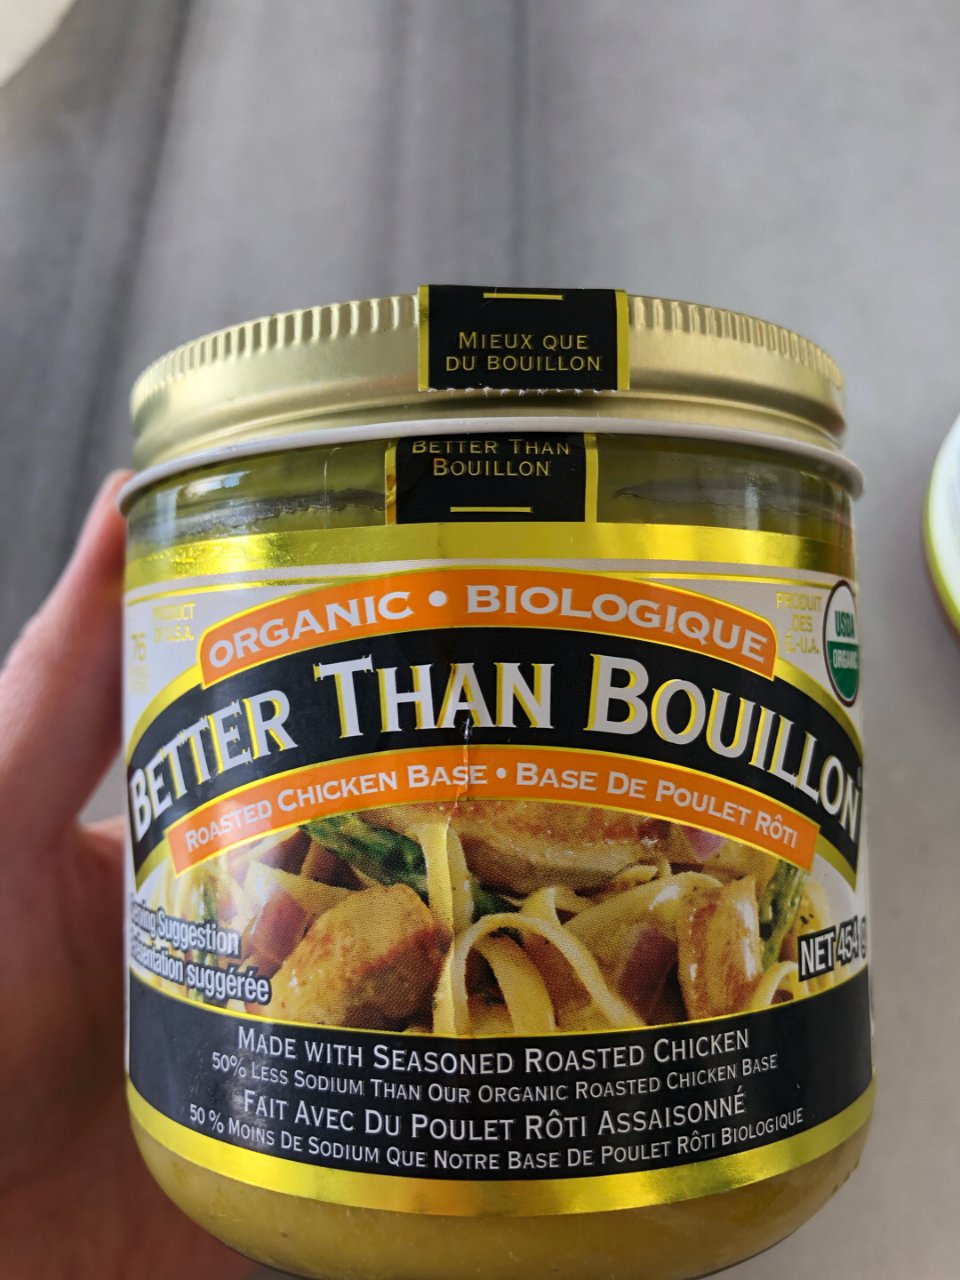 Better Than Bouillon Organic Roasted Chicken Base, Reduced Sodium - 16 Oz, 1 Pounds: Amazon.ca: Grocery